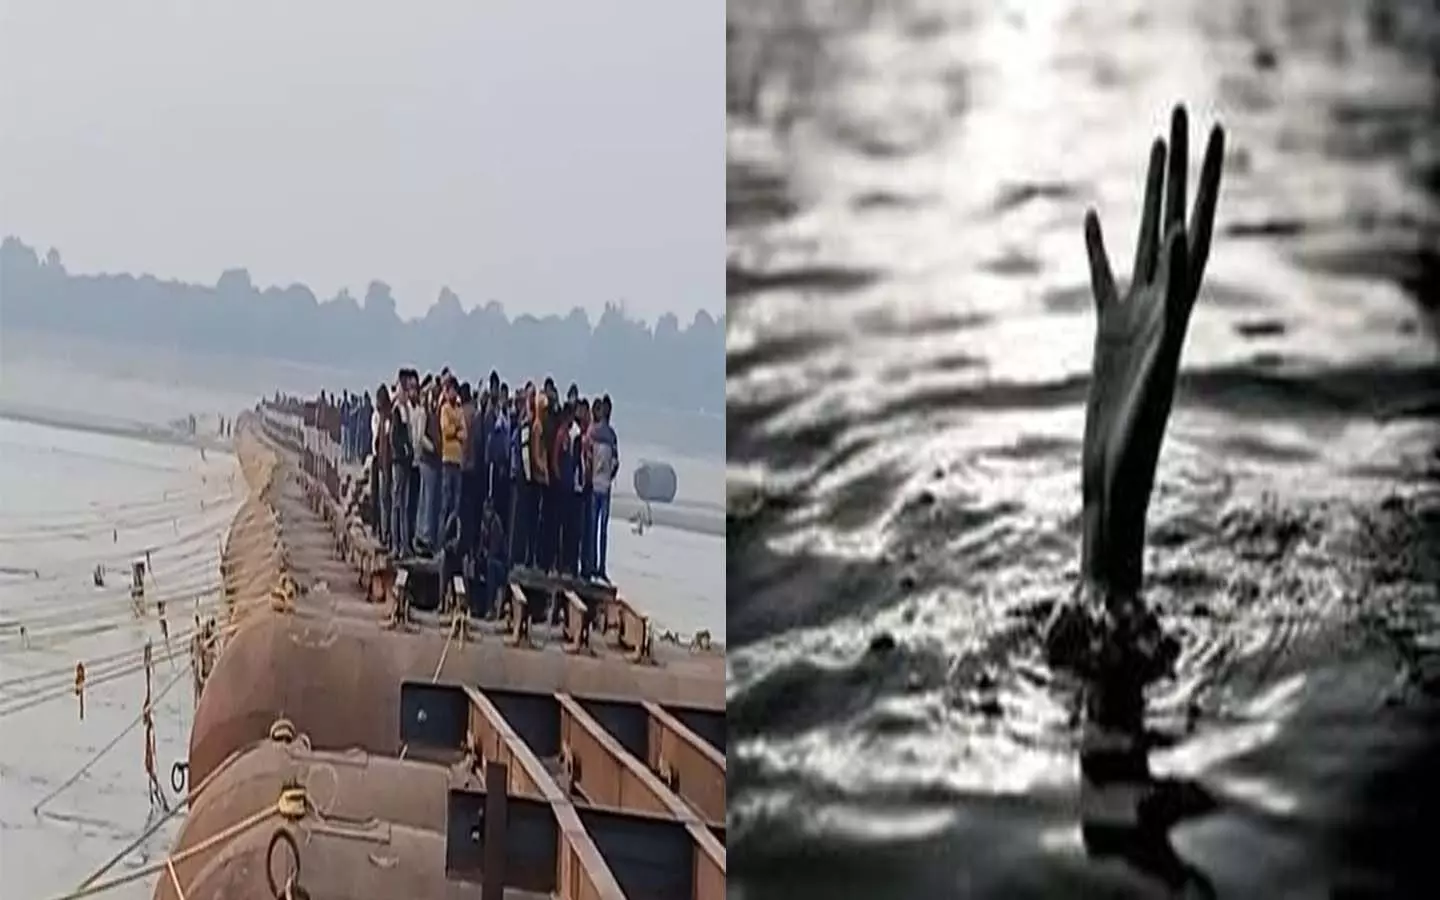 mirzapur boat accident: three girls missing in ganga after boat capsize, one woman rescued